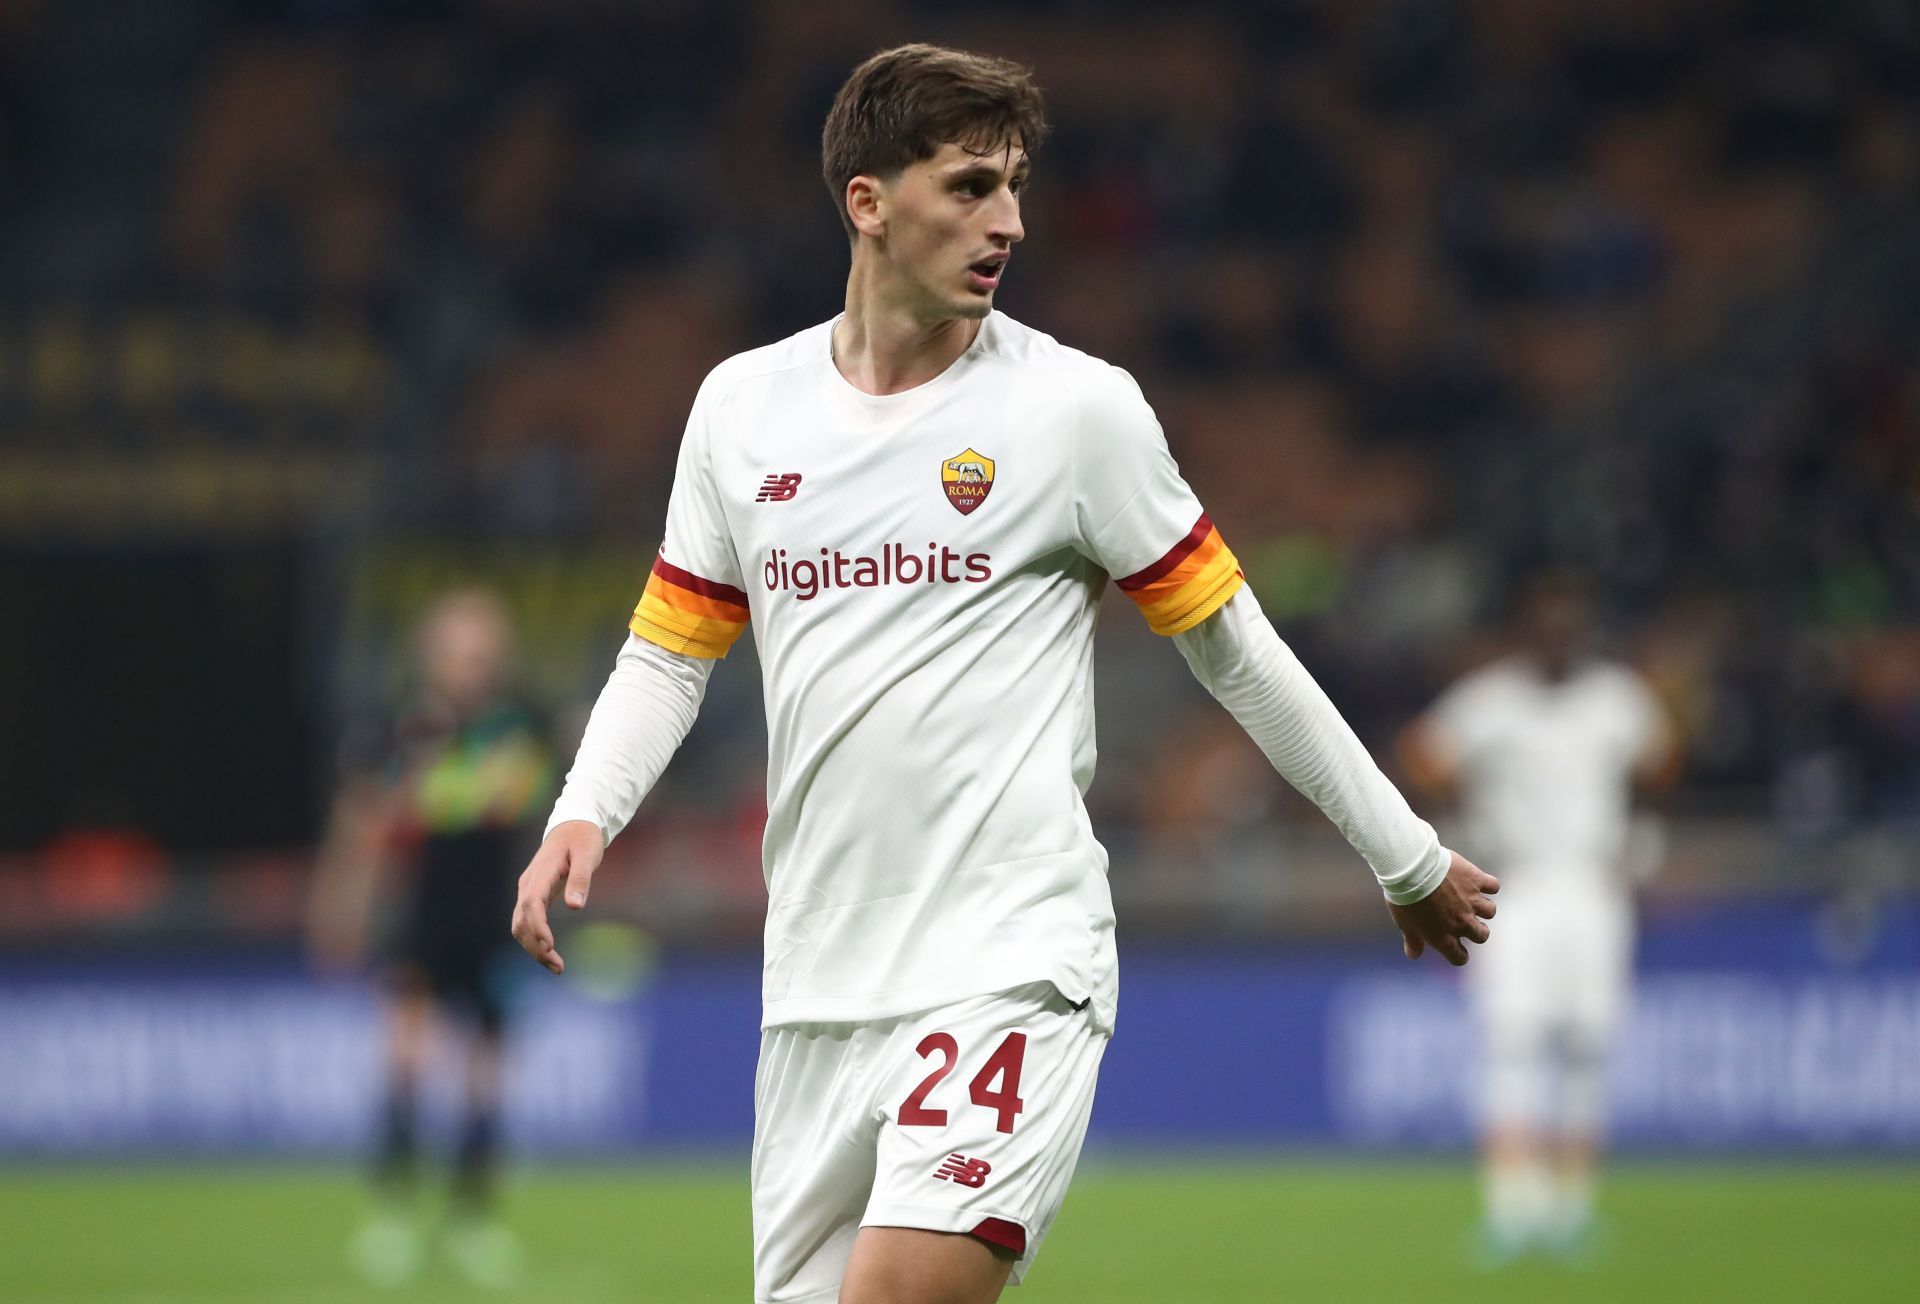 AS Roma fell to Inter Milan in the quarter-finals of the Coppa Italia